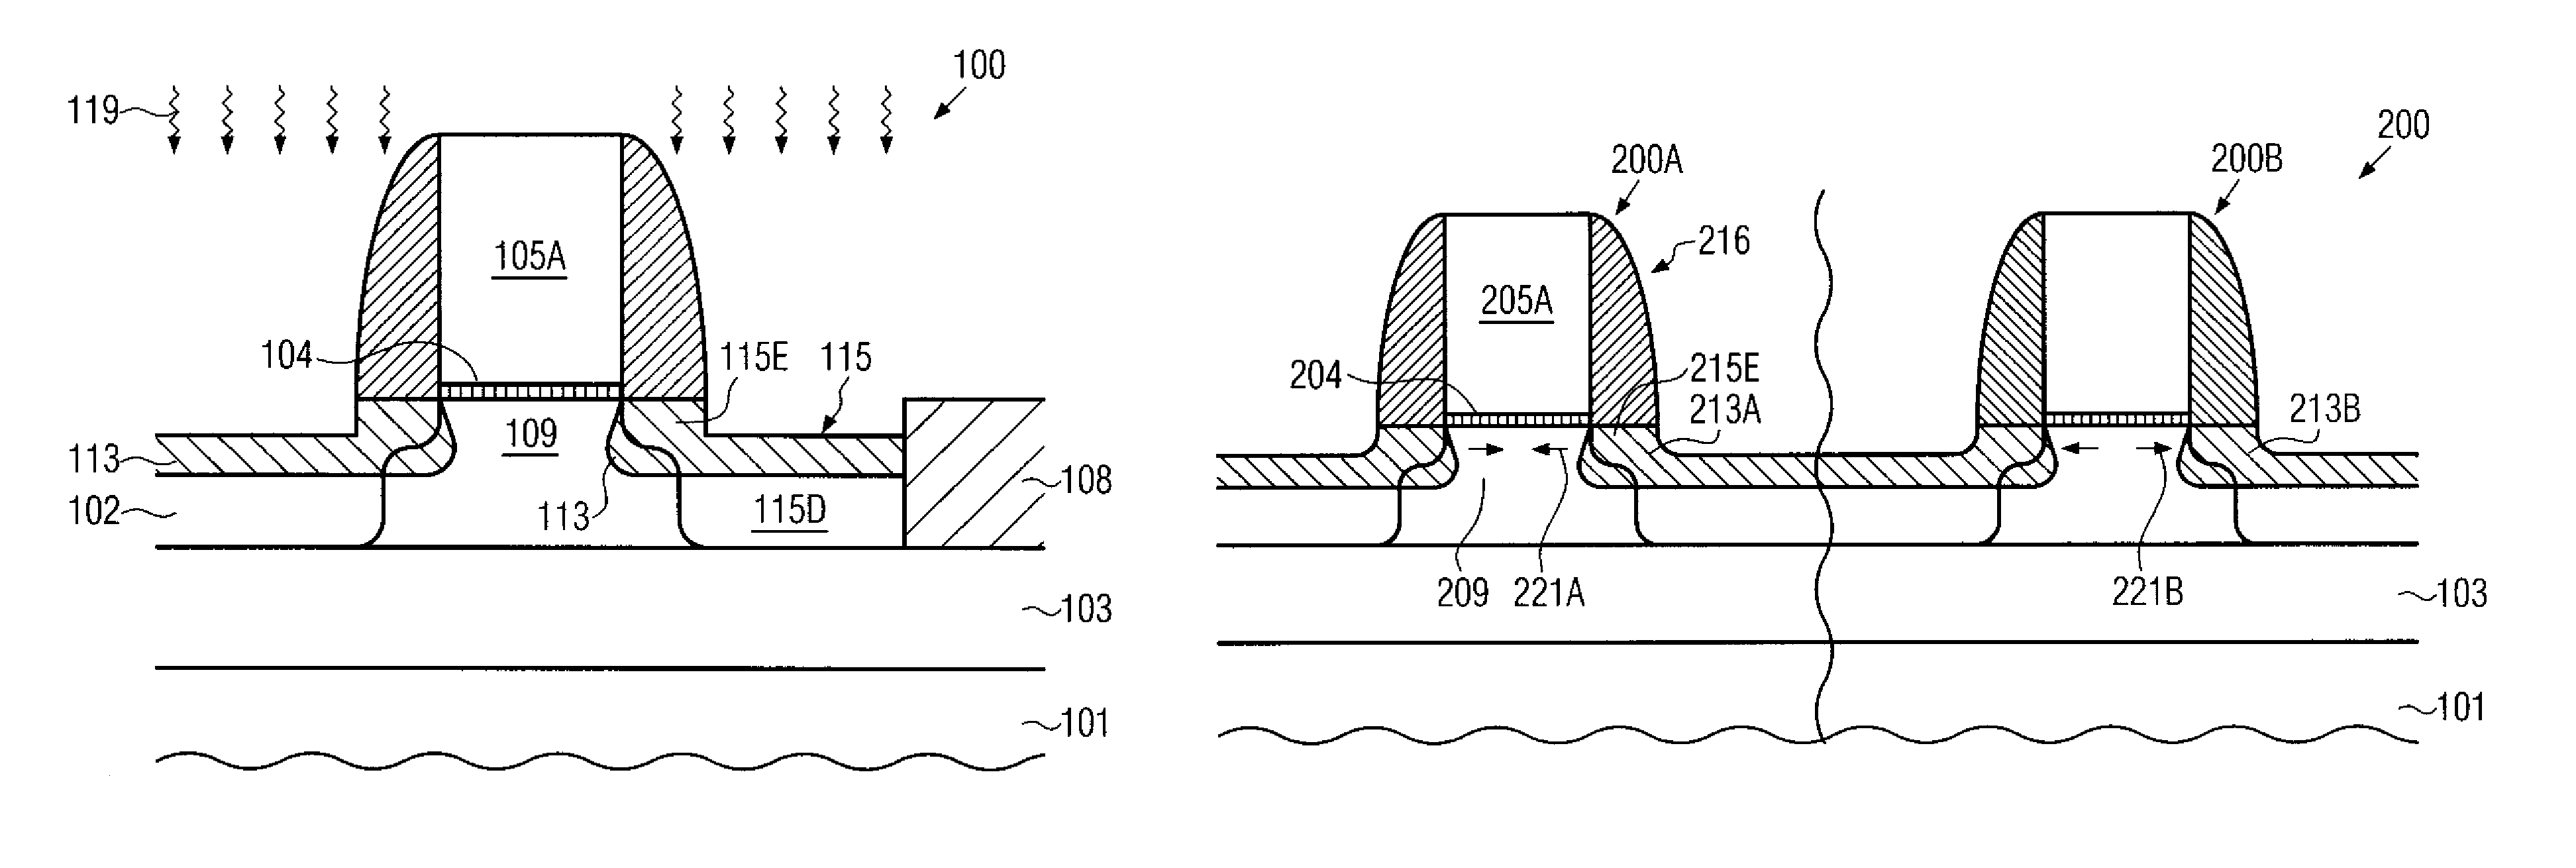 Reducing transistor junction capacitance by recessing drain and source regions